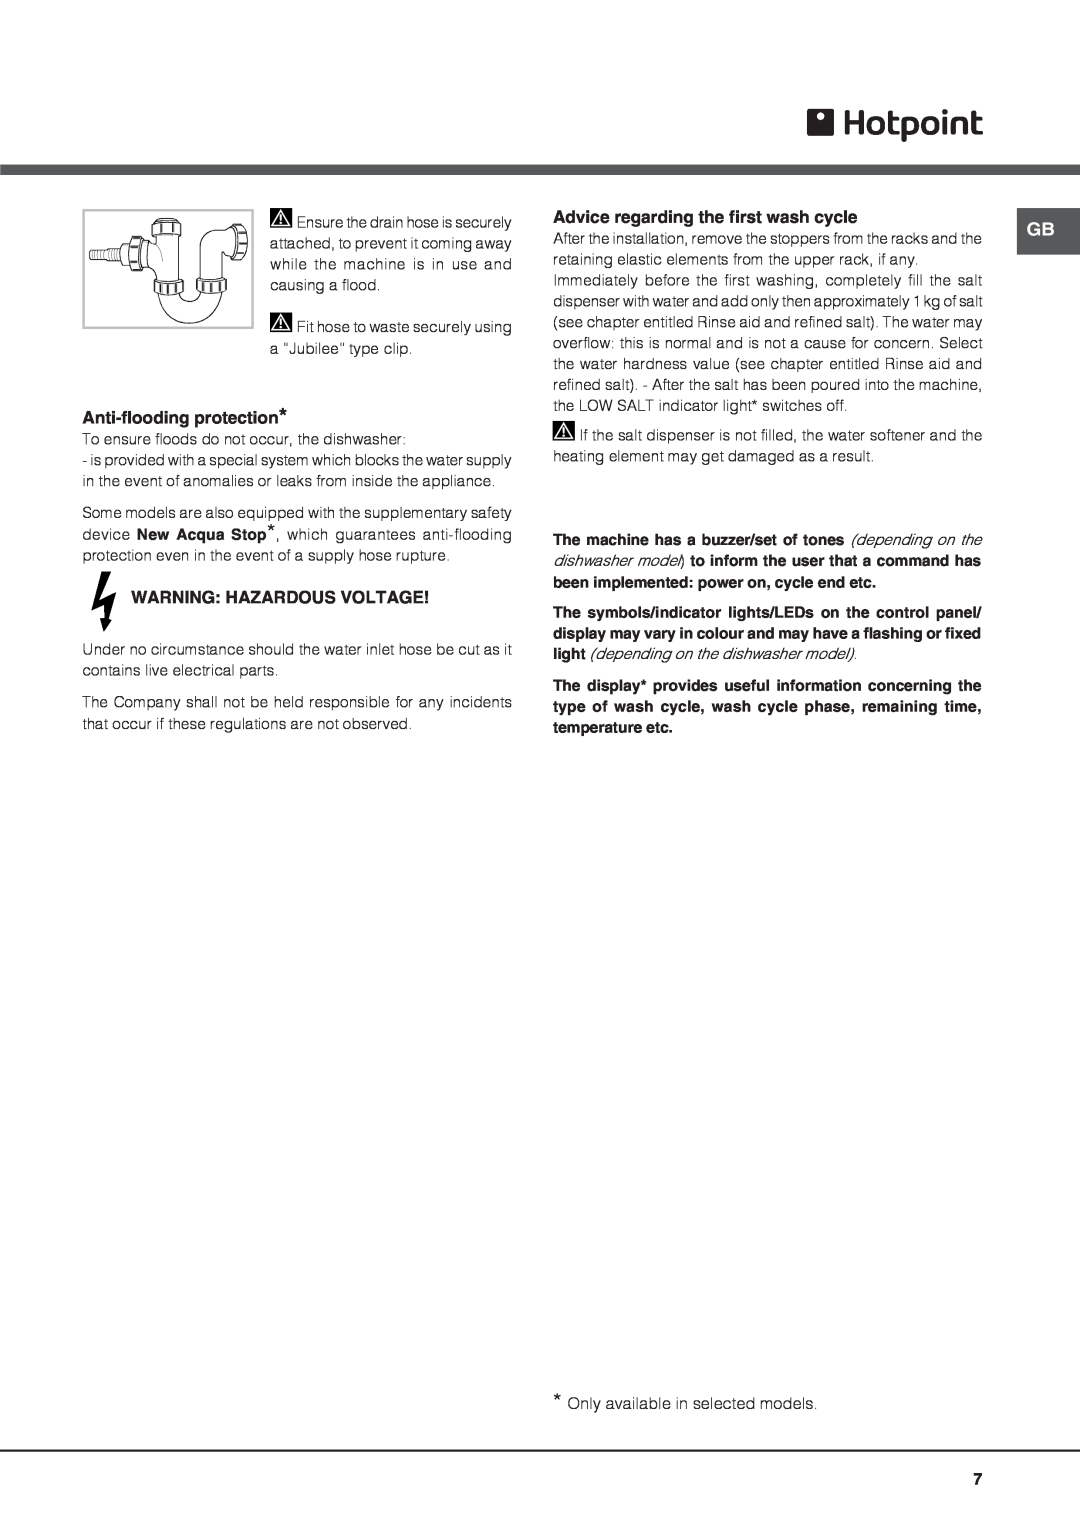 Hotpoint LTB 4B019 manual Anti-flooding protection, Warning Hazardous Voltage, Advice regarding the first wash cycle 